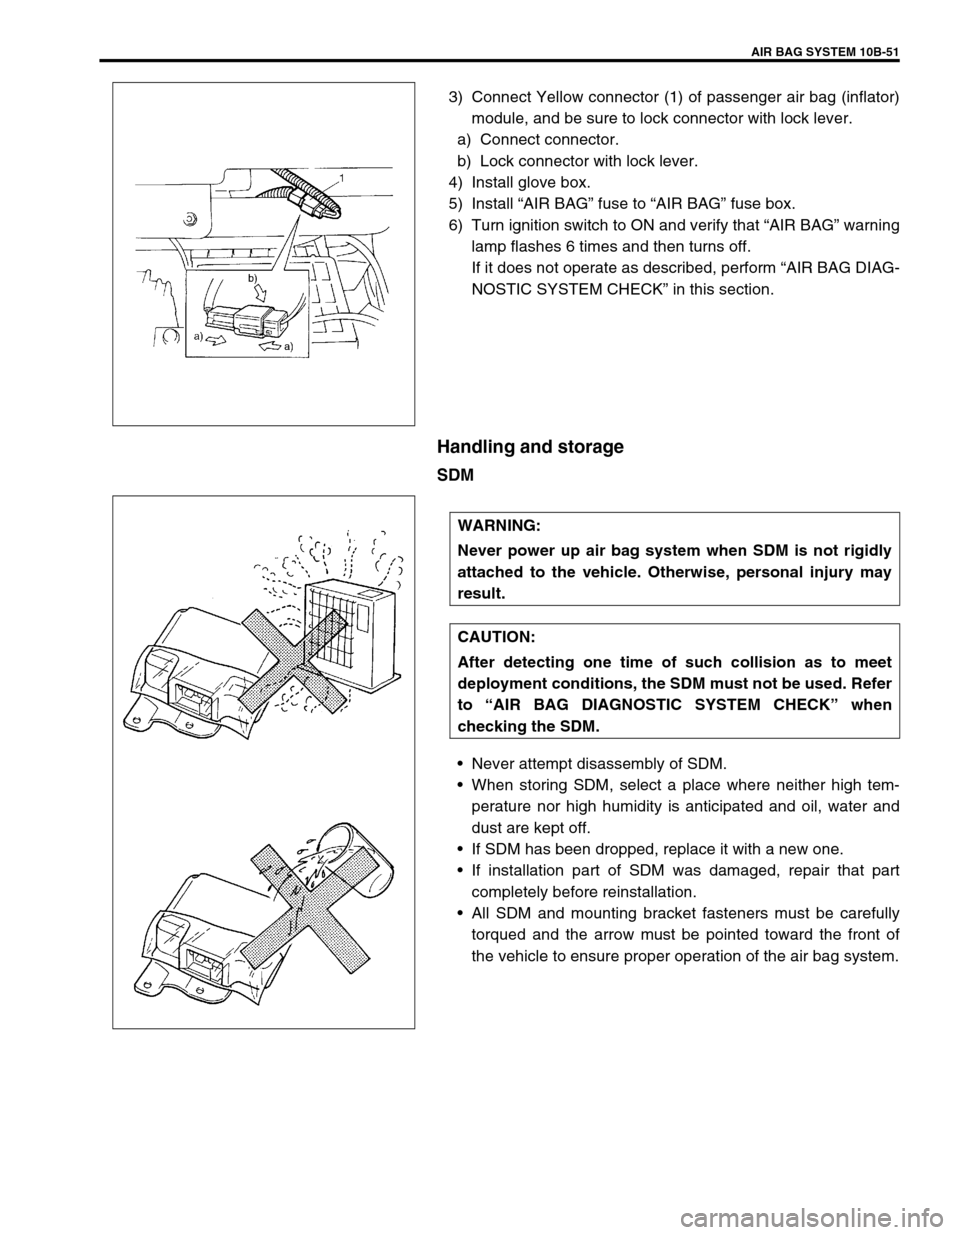 SUZUKI GRAND VITARA 1999 2.G Owners Manual AIR BAG SYSTEM 10B-51
3) Connect Yellow connector (1) of passenger air bag (inflator)
module, and be sure to lock connector with lock lever.
a) Connect connector.
b) Lock connector with lock lever.
4)